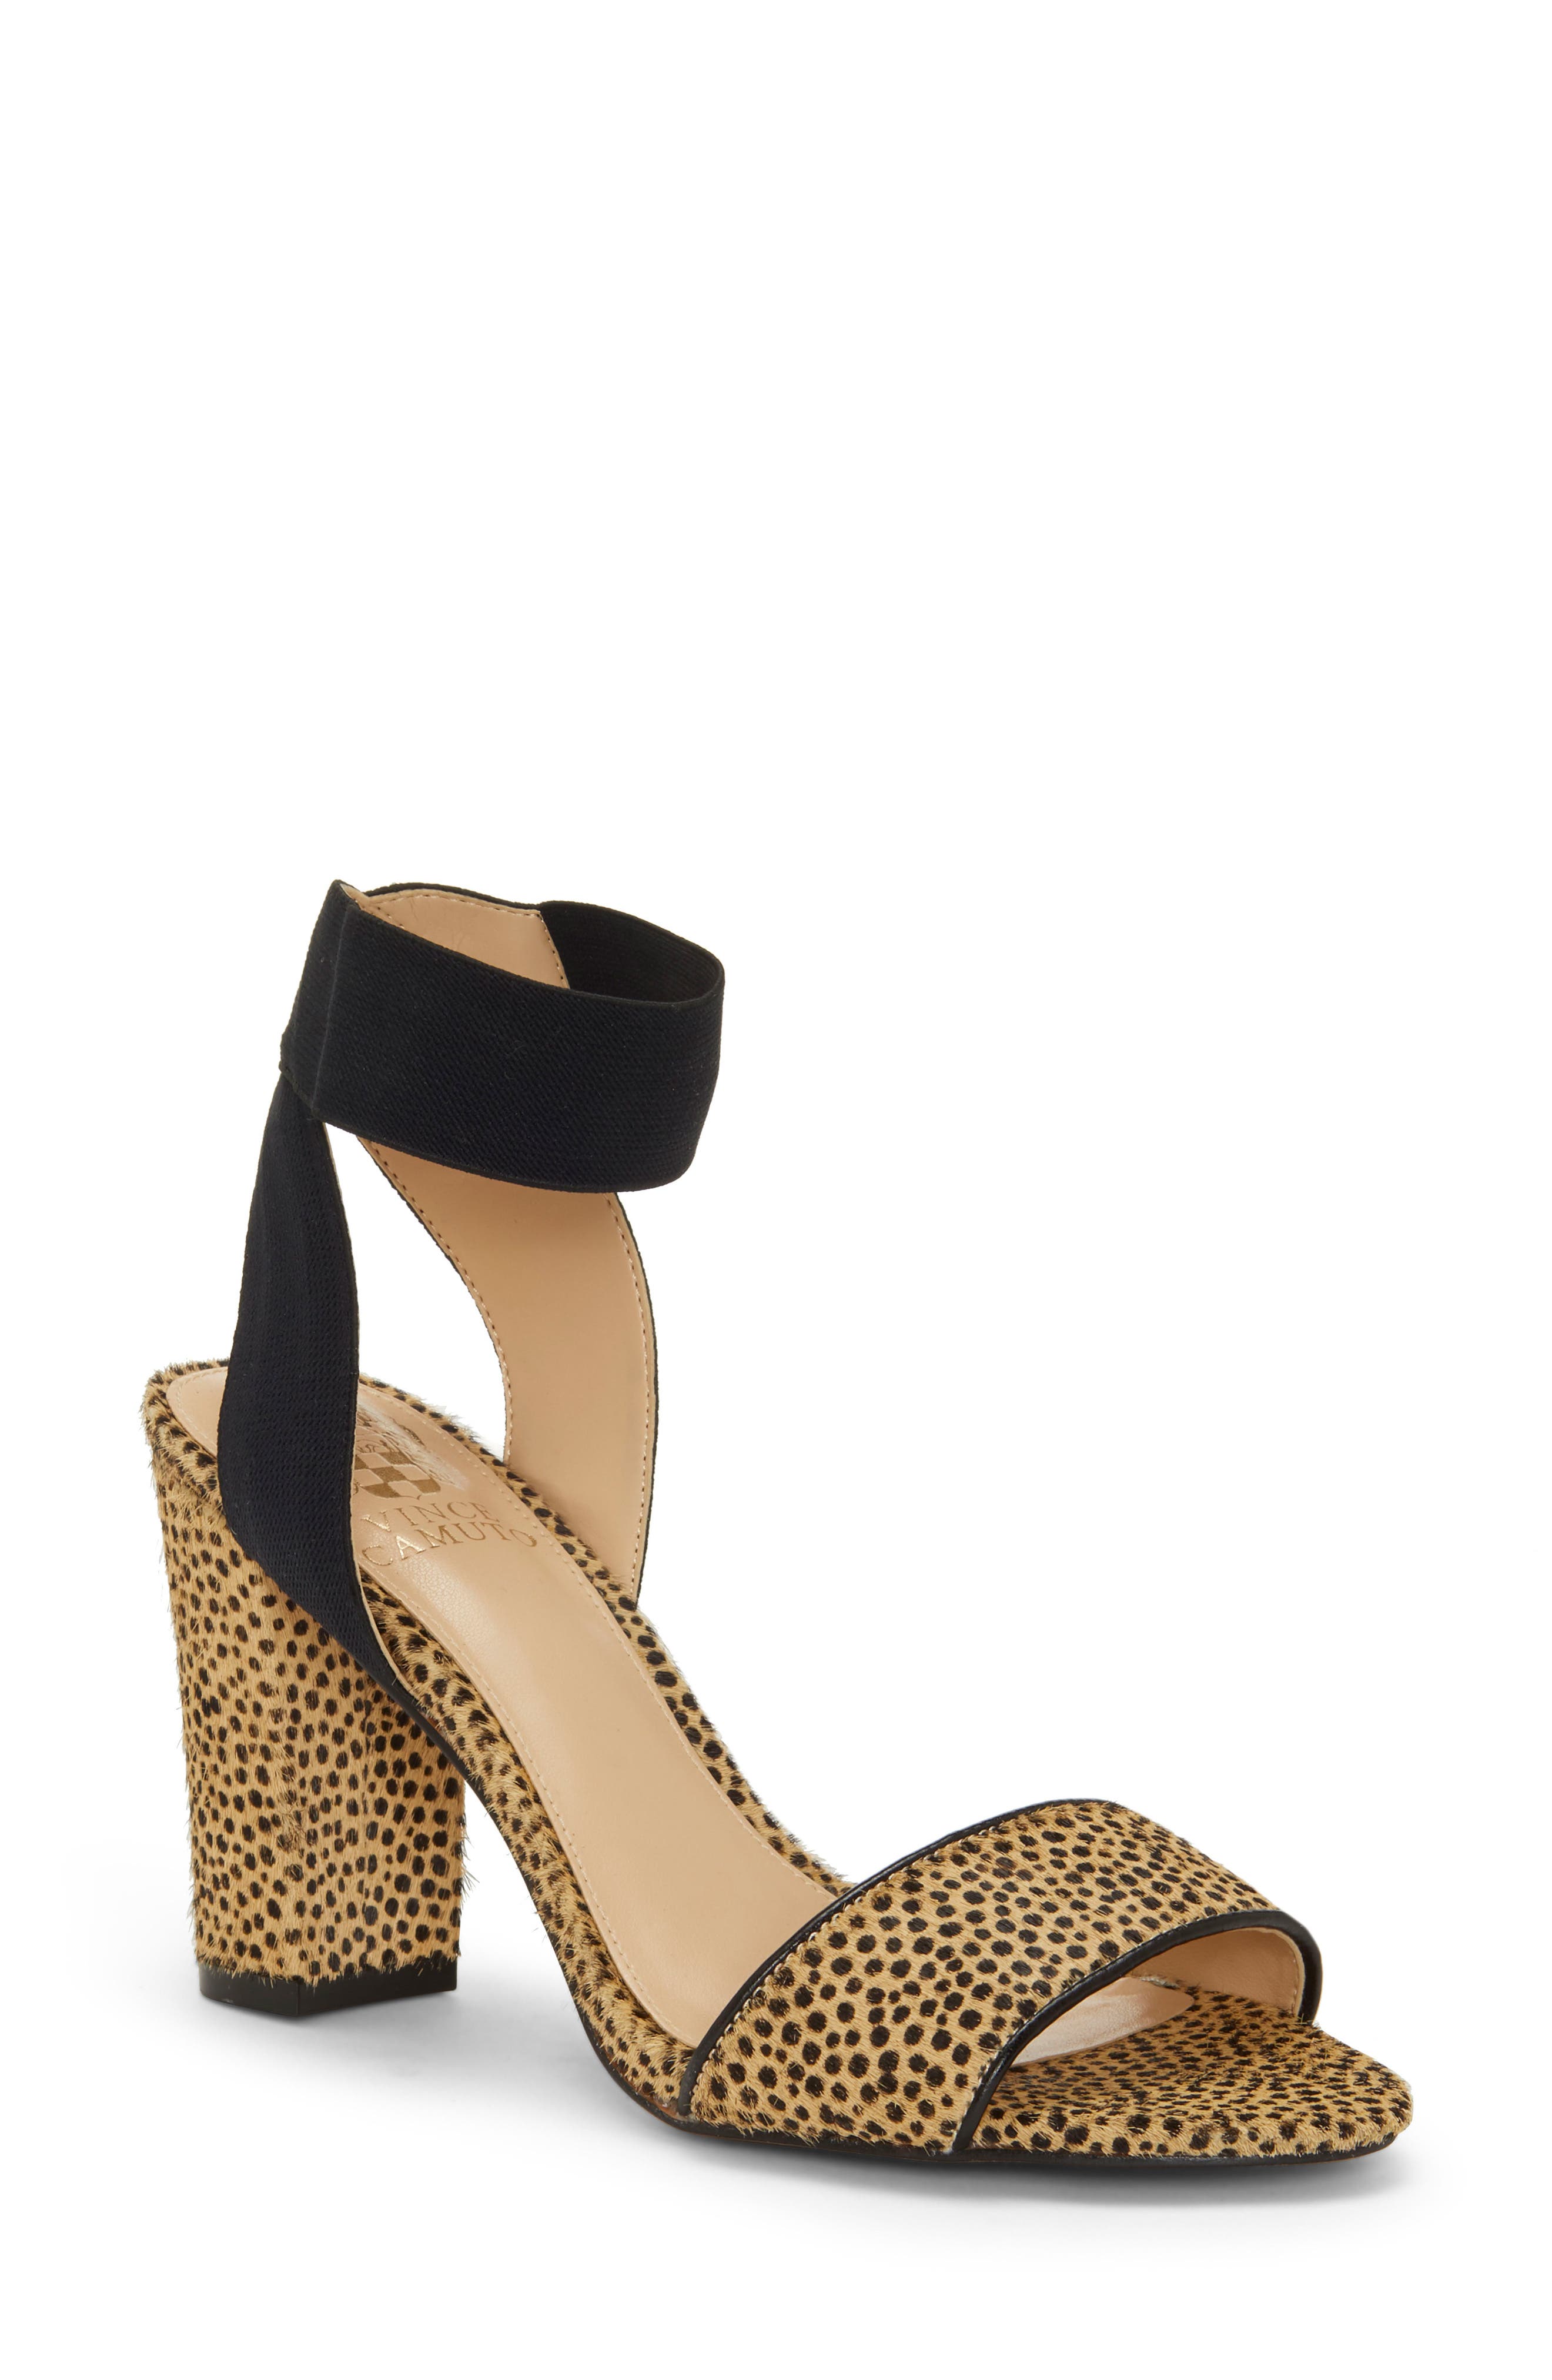 vince camuto sandals canada